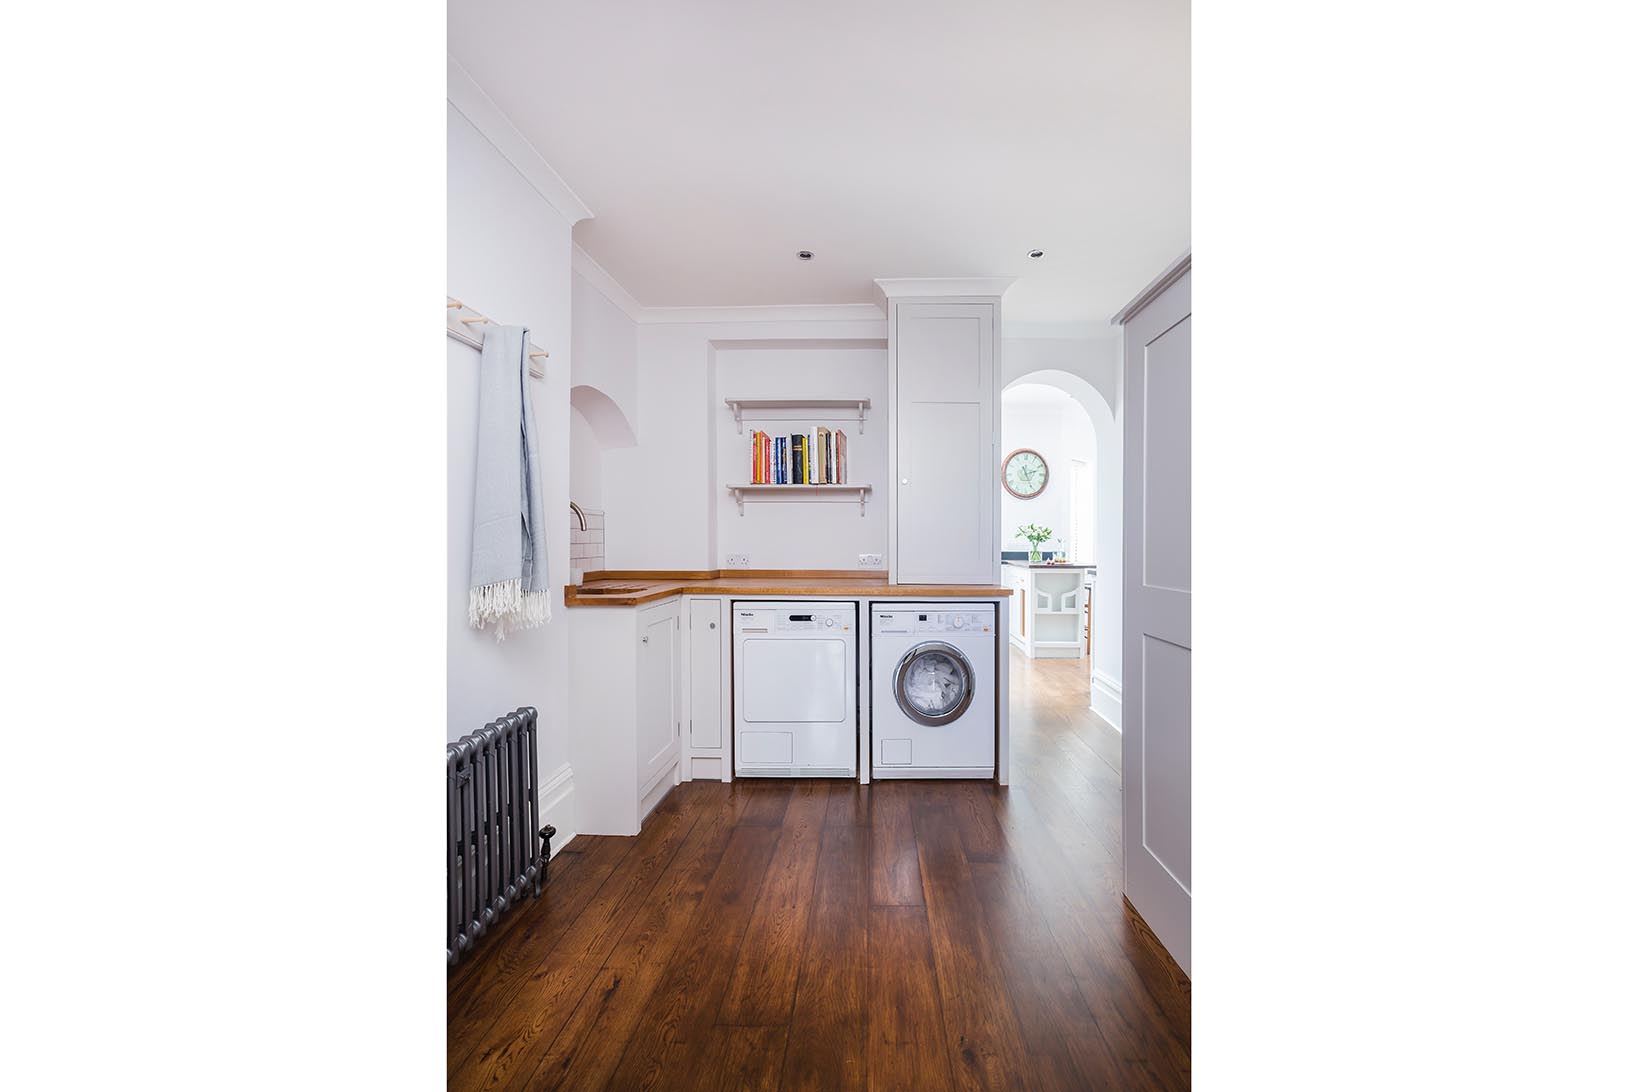 White shaker utility room with wall shelves and wooden worktops and flooring and a Miele washing machine and tumble dryer.